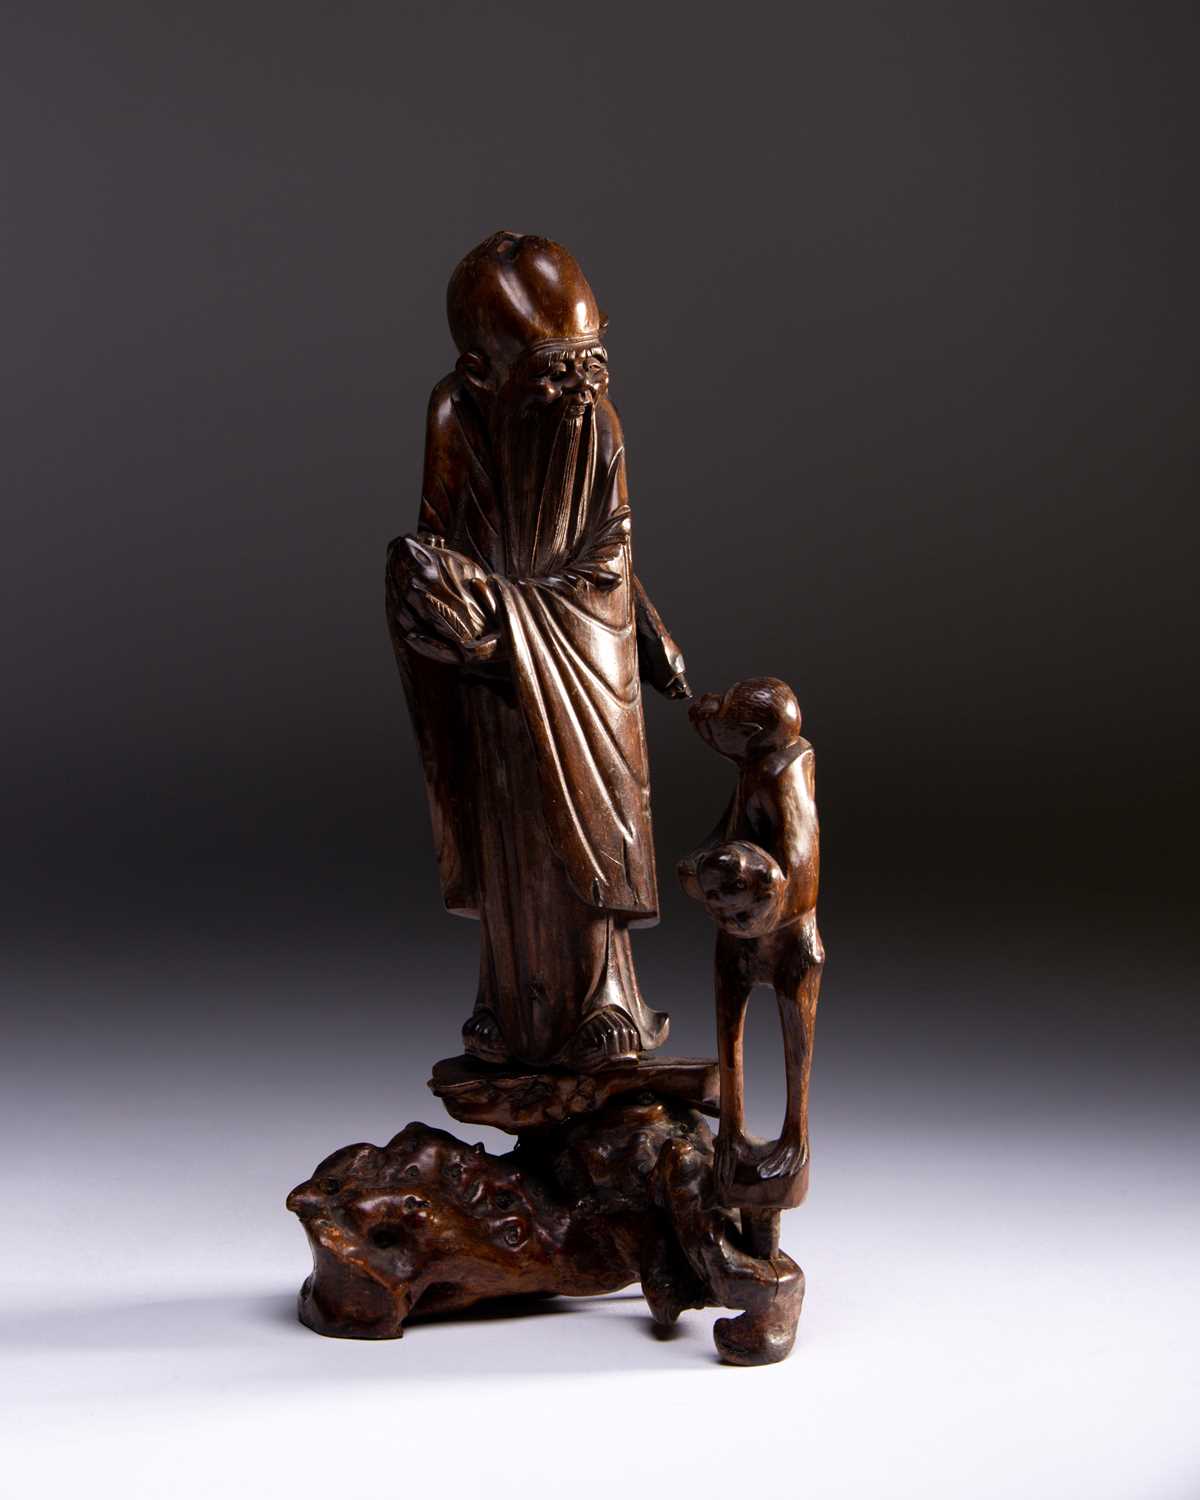 A Chinese carved wood figure of Shoulao and a Monkey, Qing, 中国, 寿老与猴木雕像一件，清代，18世纪 18th century,